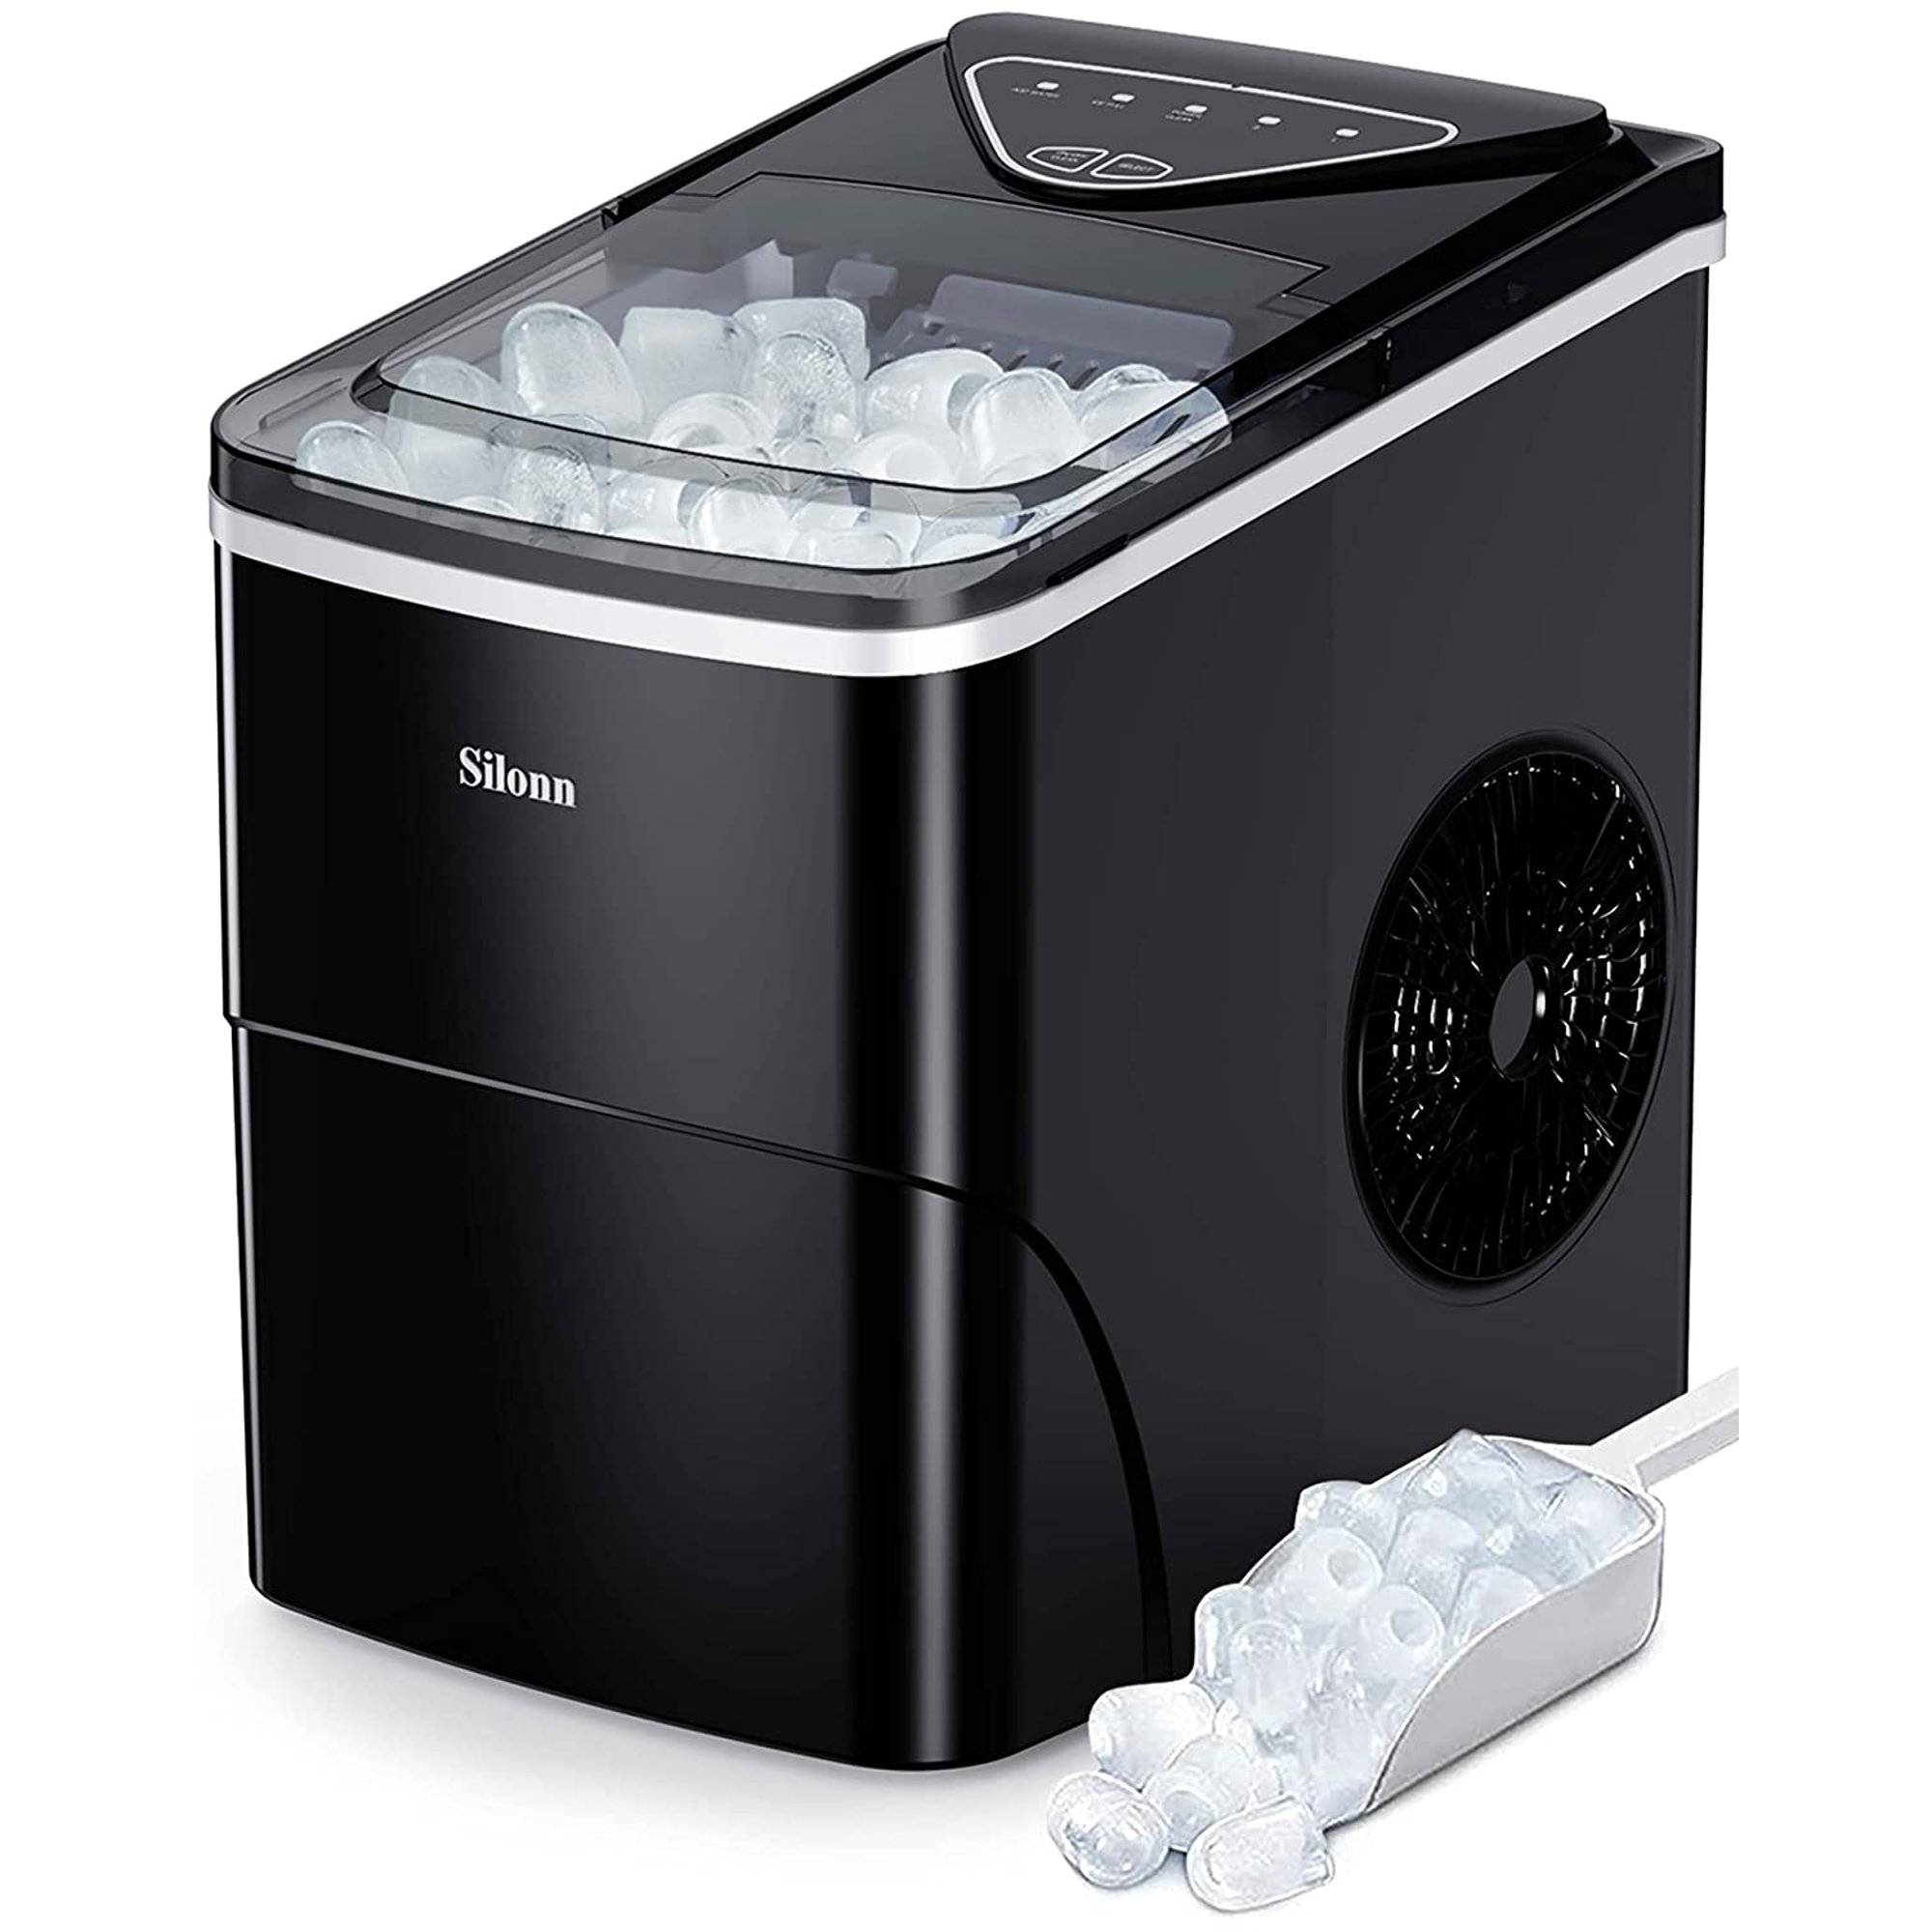 Silonn Countertop Ice Maker Machine with Handle, Portable Makers  Countertop, Makes up to 27 lbs. of Per Day, 9 Cubes in 7 Mins,  Self-Cleaning Scoop